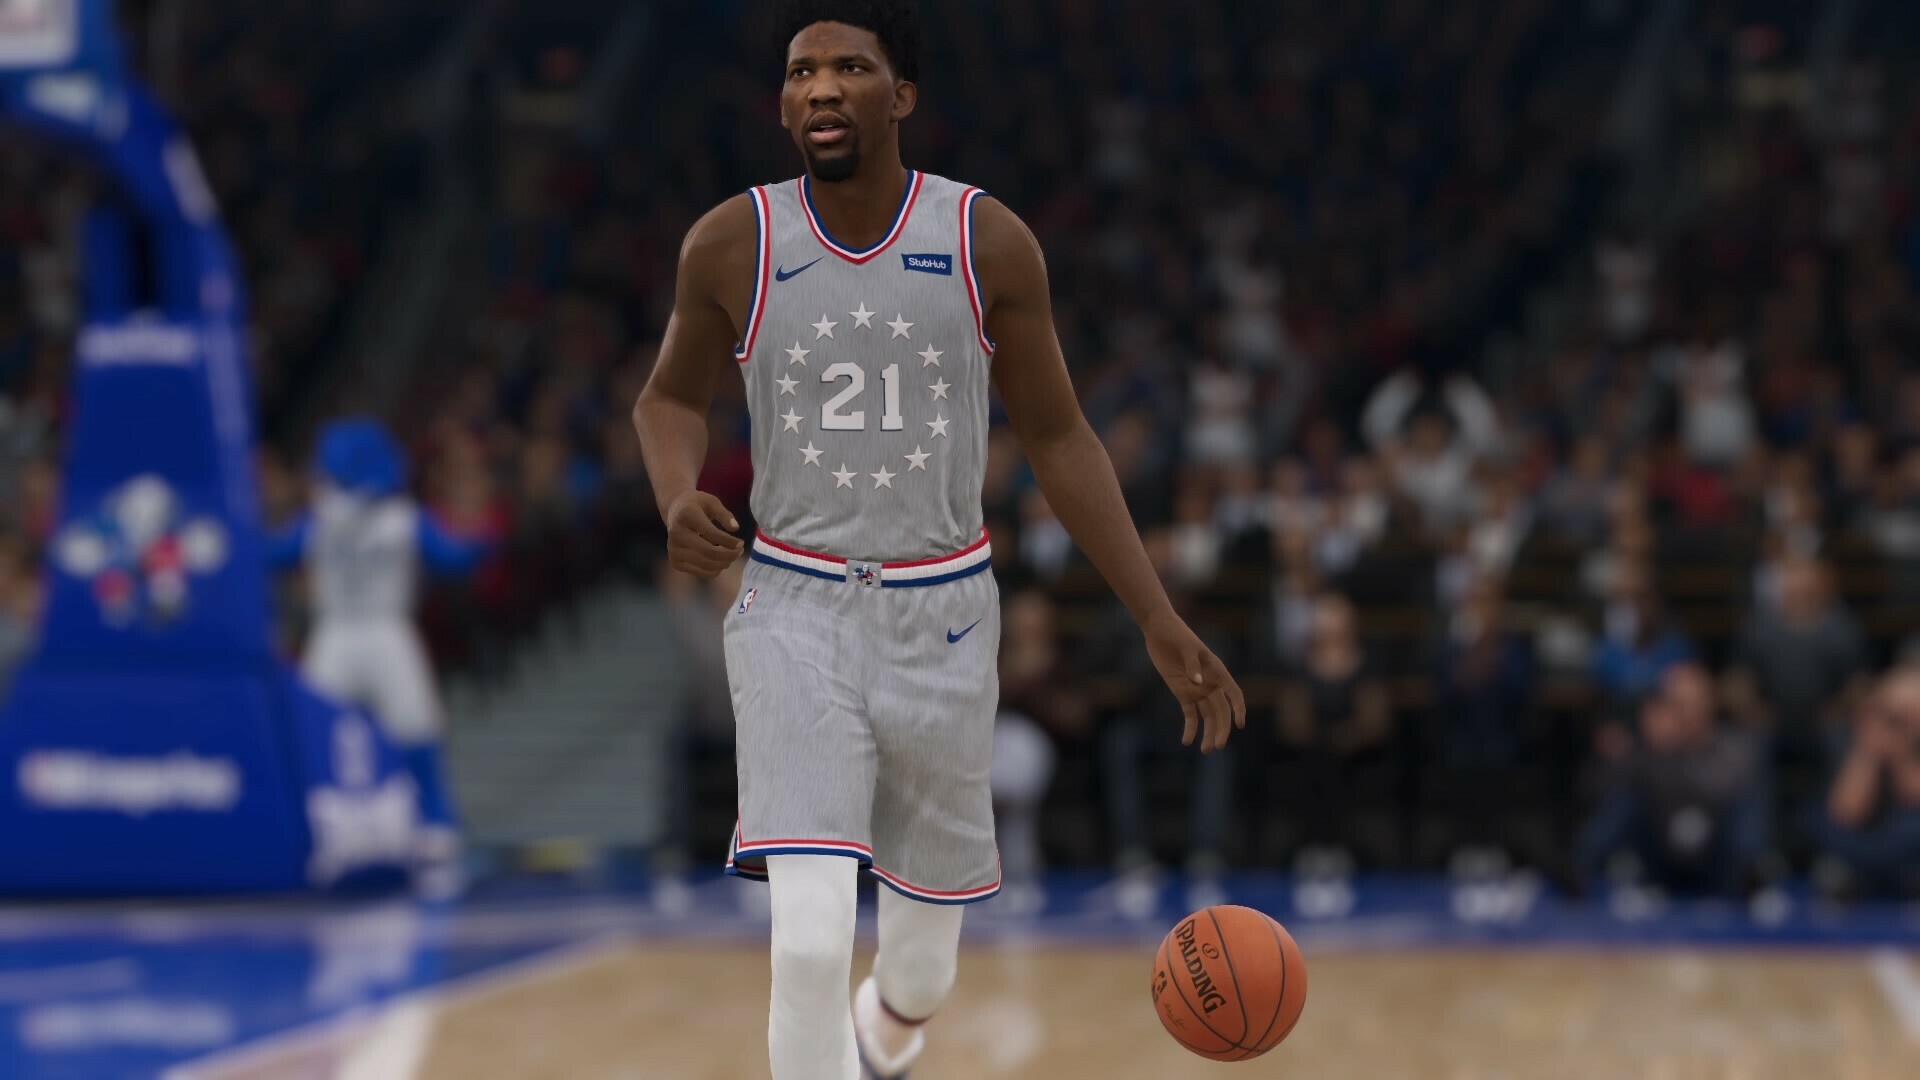 City Edition Uniforms Added to NBA Live 18 - NLSC